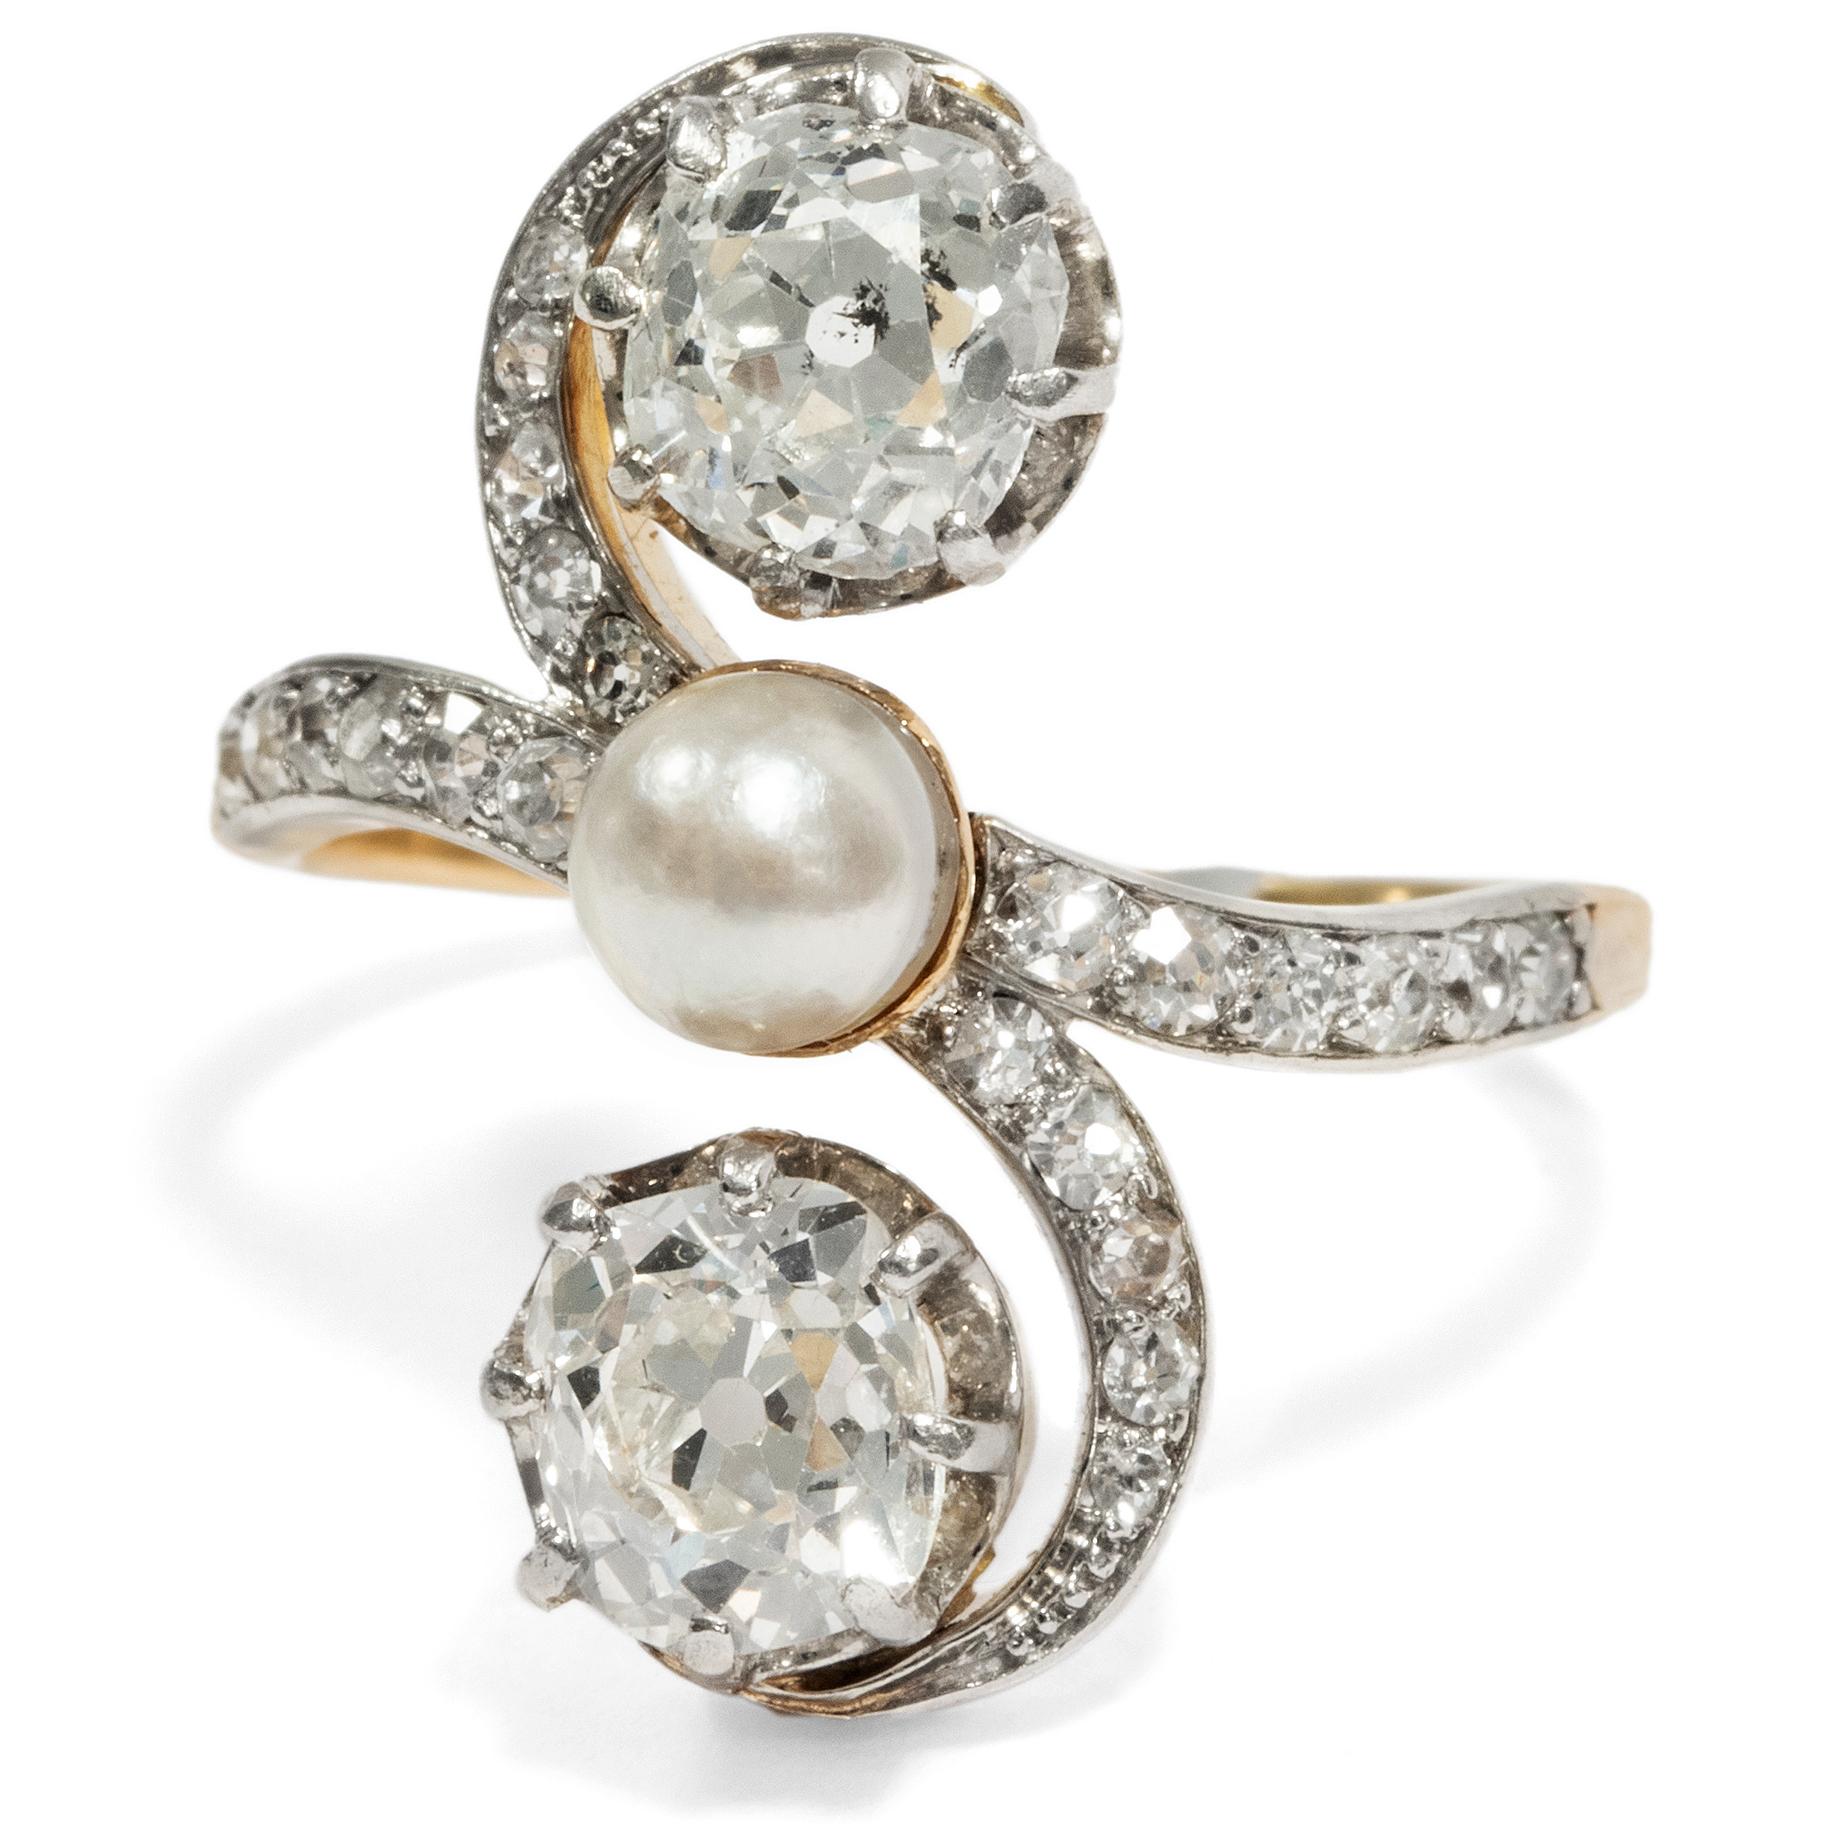 Trilogy rings were especially popular during the early 20th century, as they are carriers of a romantic message: comprising three gemstones, they allude to the shared past, presence and future of a couple. Often, as here, the central gemstone